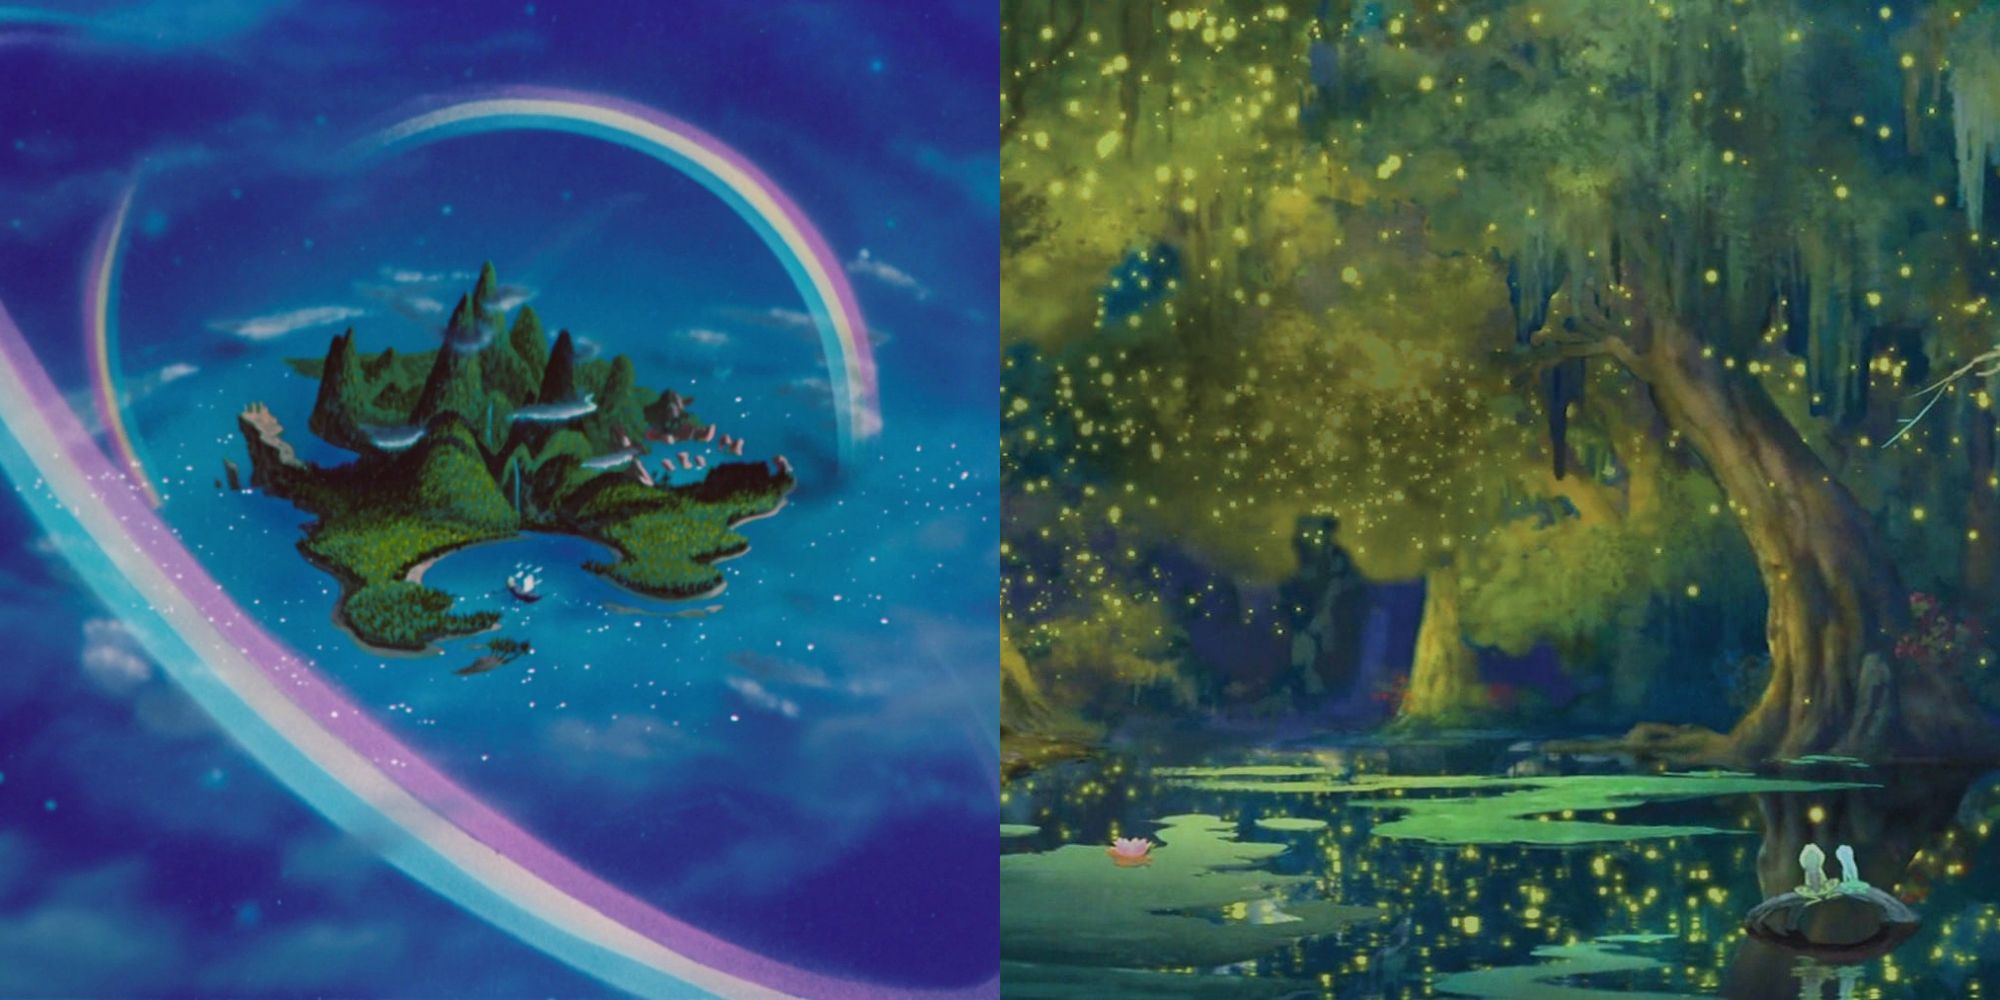 Peter Pan's Neverland and the bayou from The Princess and the Frog could appear in Disney Dreamlight Valley.